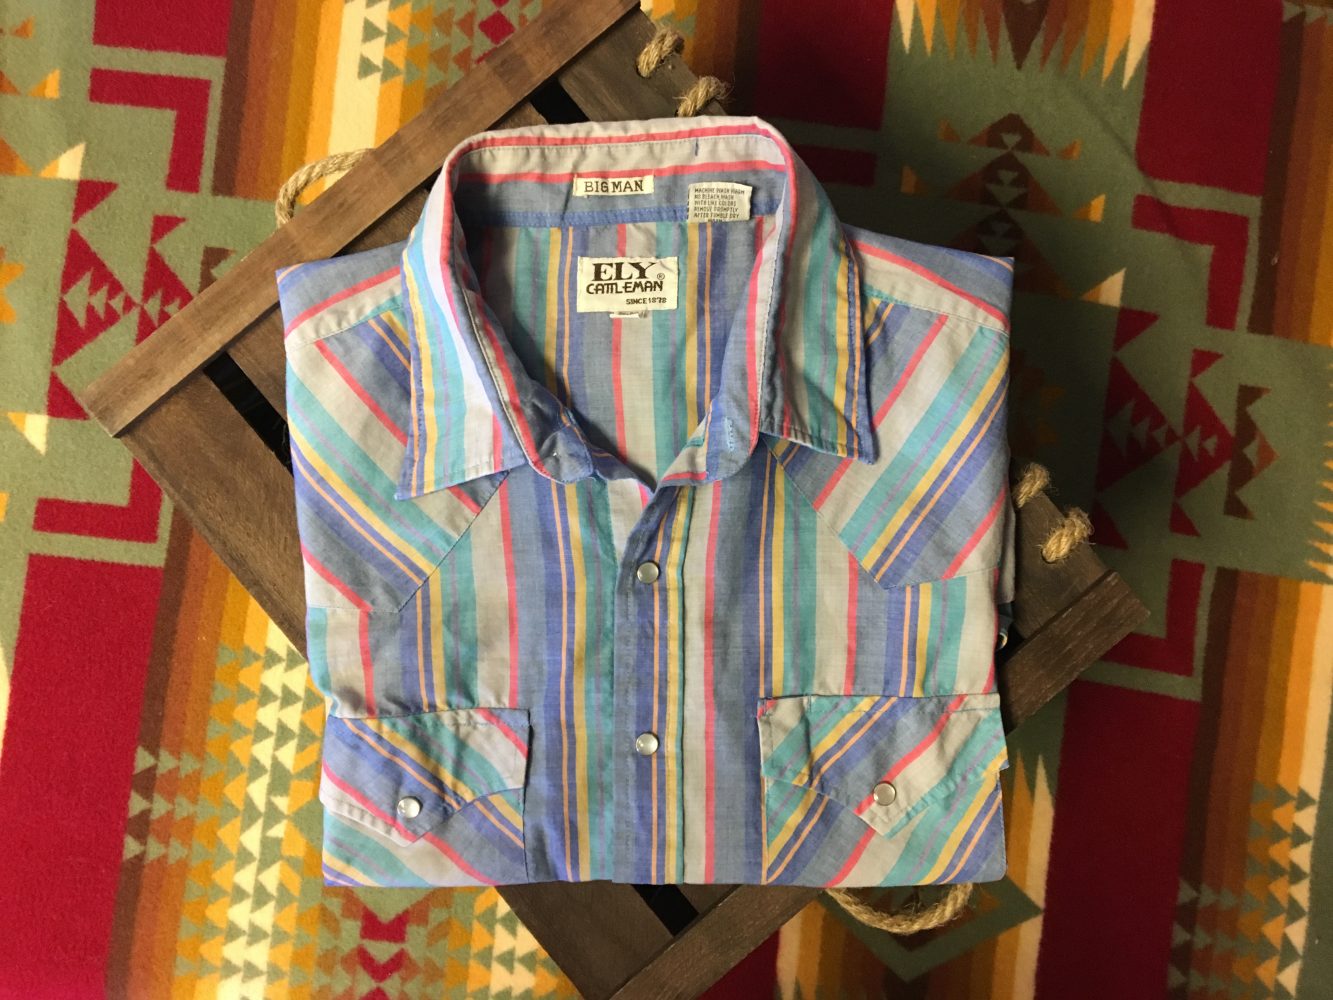 The Best Old Shirt in the World - C&I Magazine